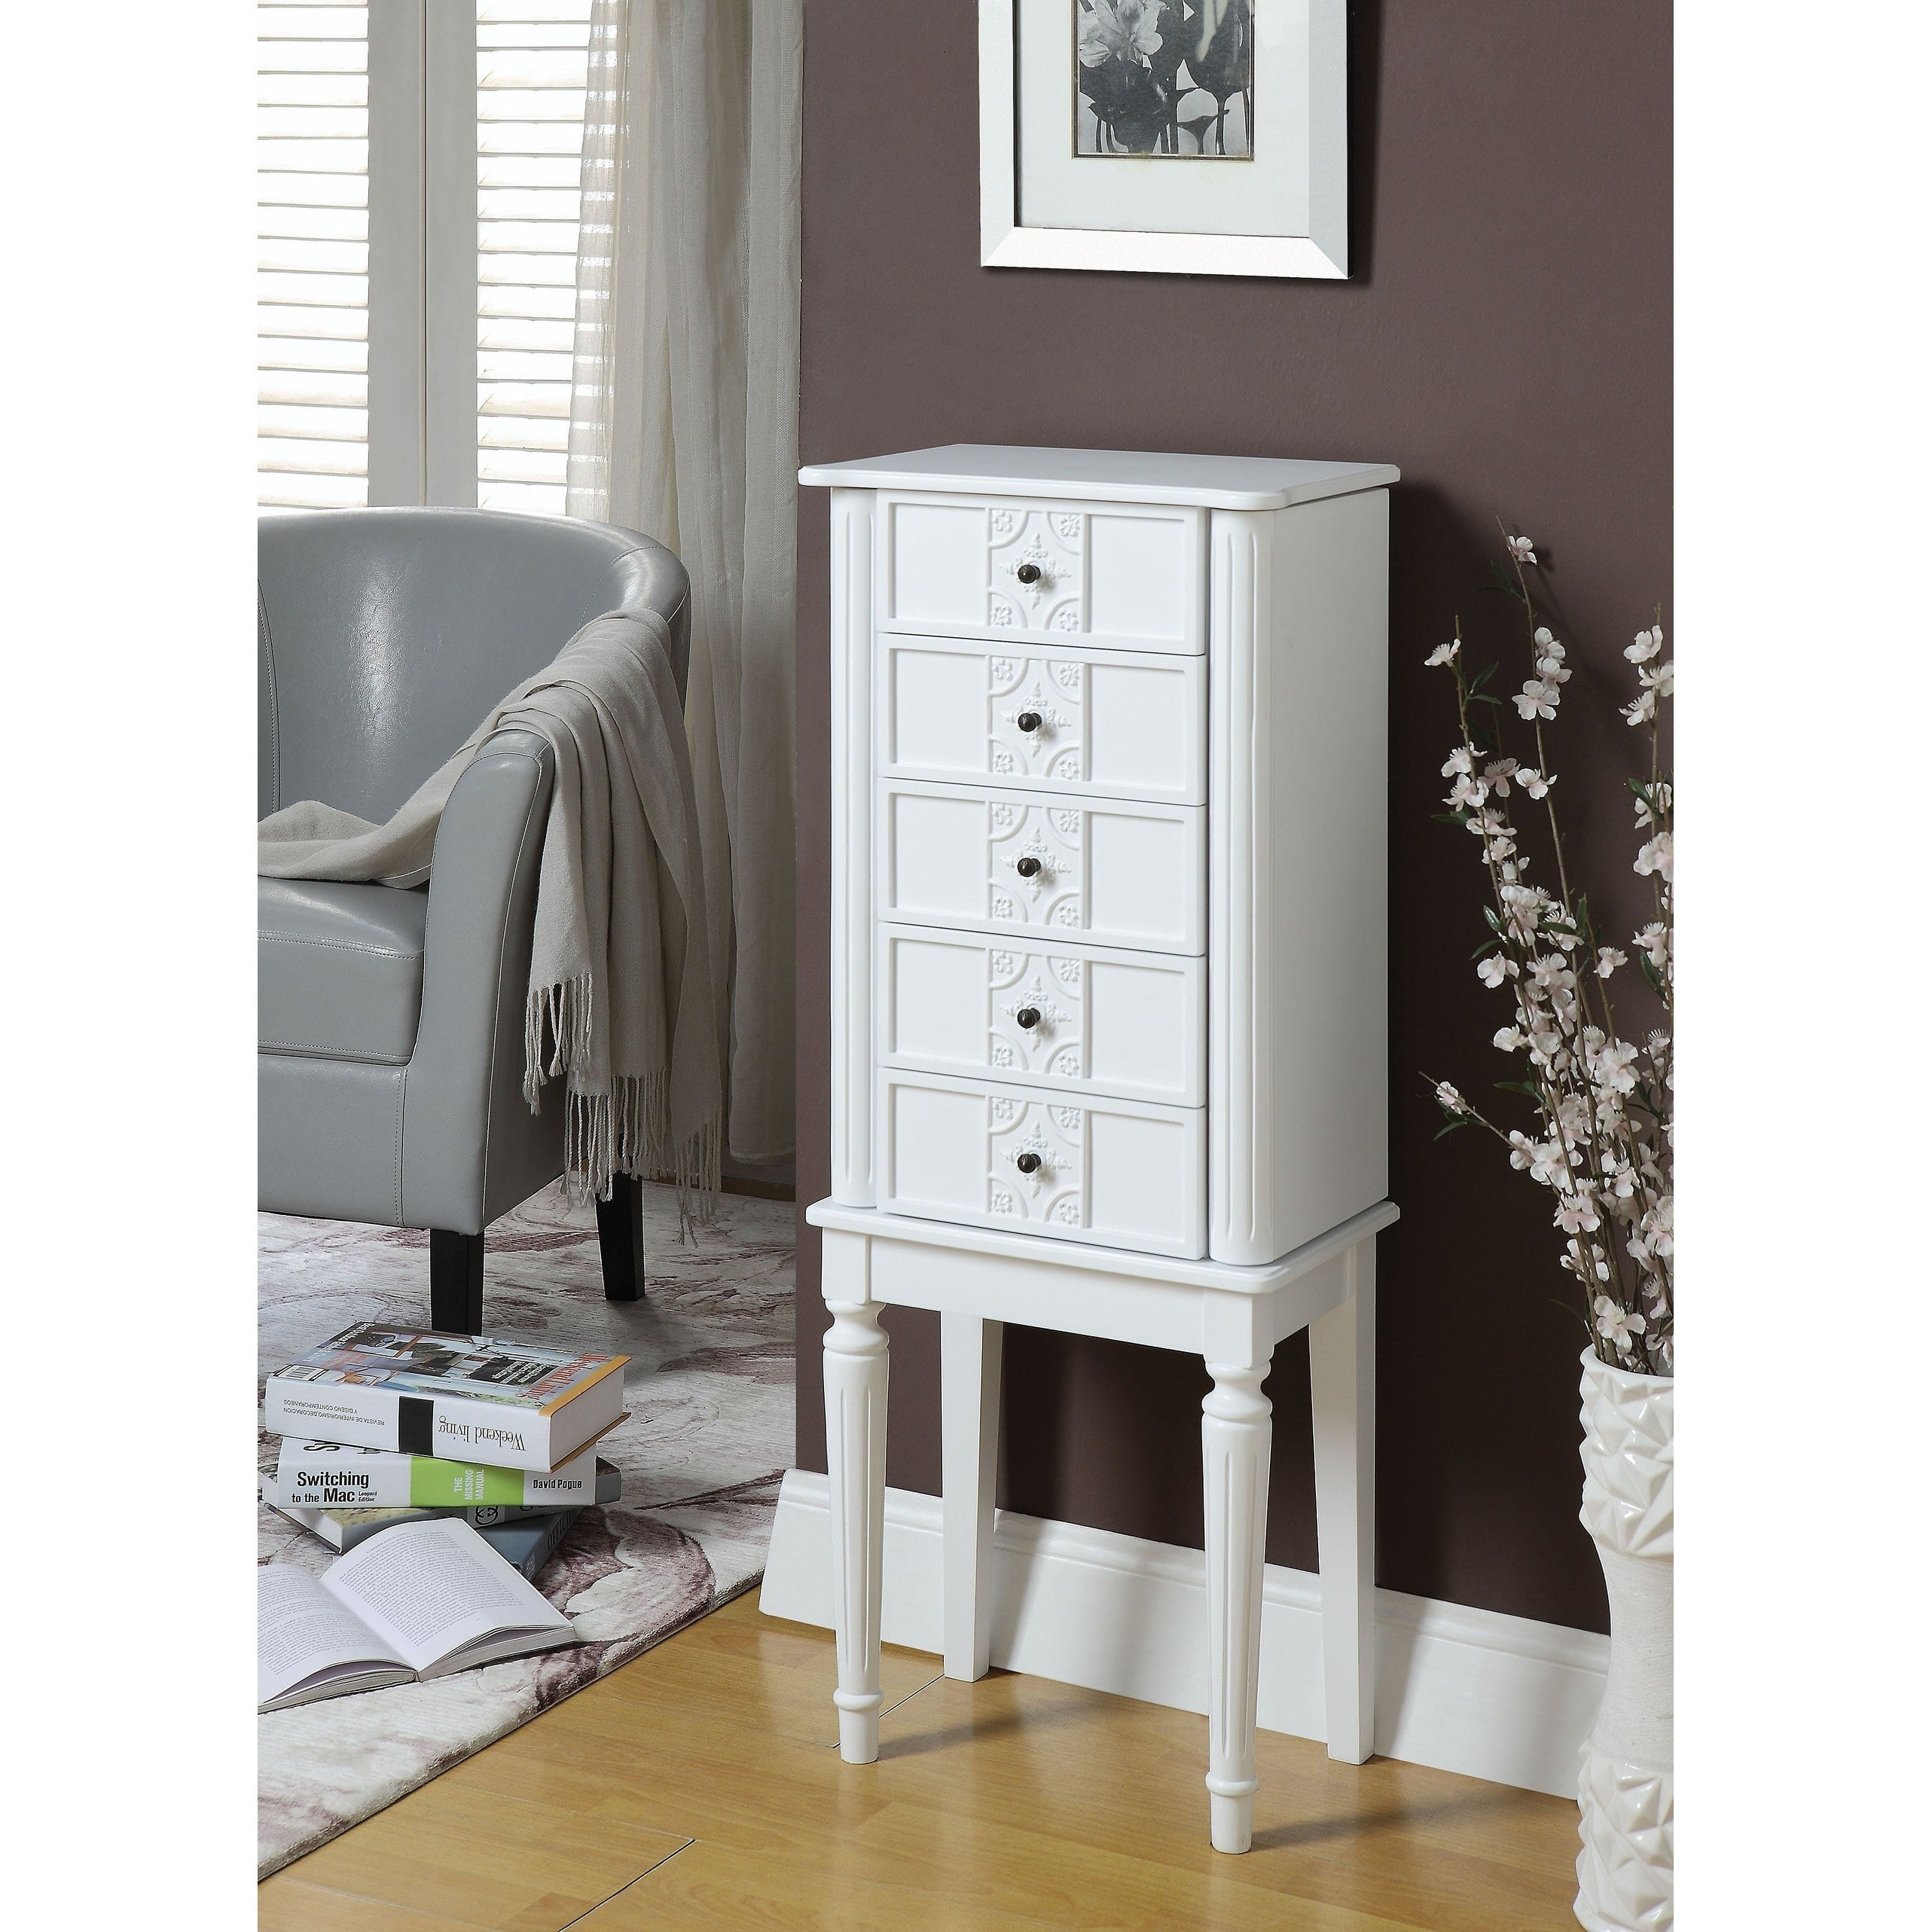 Benzara Wood Jewelry Armoire With 5 Drawers in White